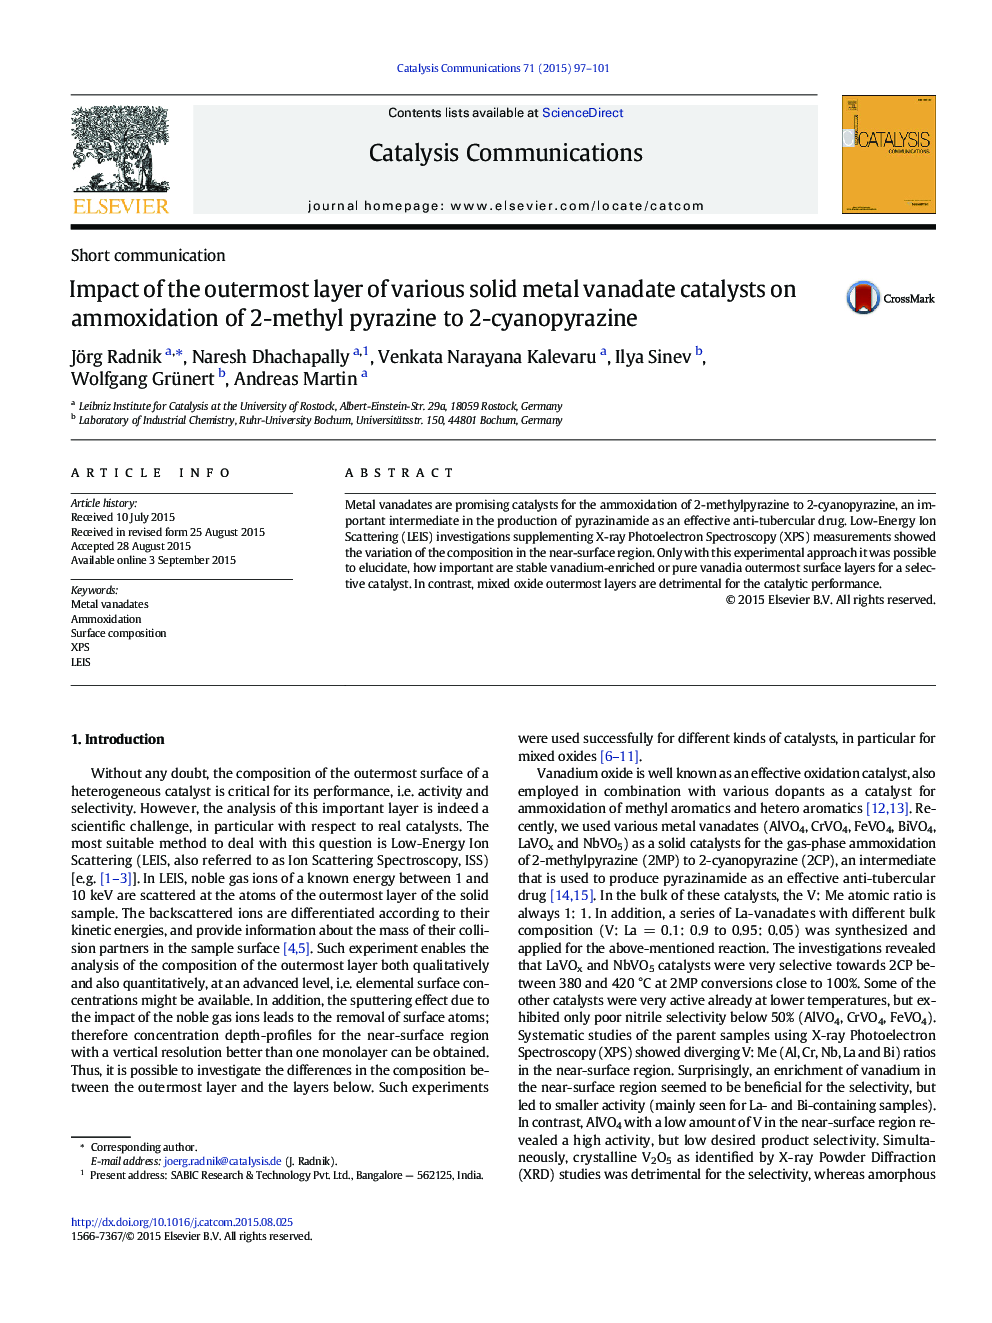 Impact of the outermost layer of various solid metal vanadate catalysts on ammoxidation of 2-methyl pyrazine to 2-cyanopyrazine